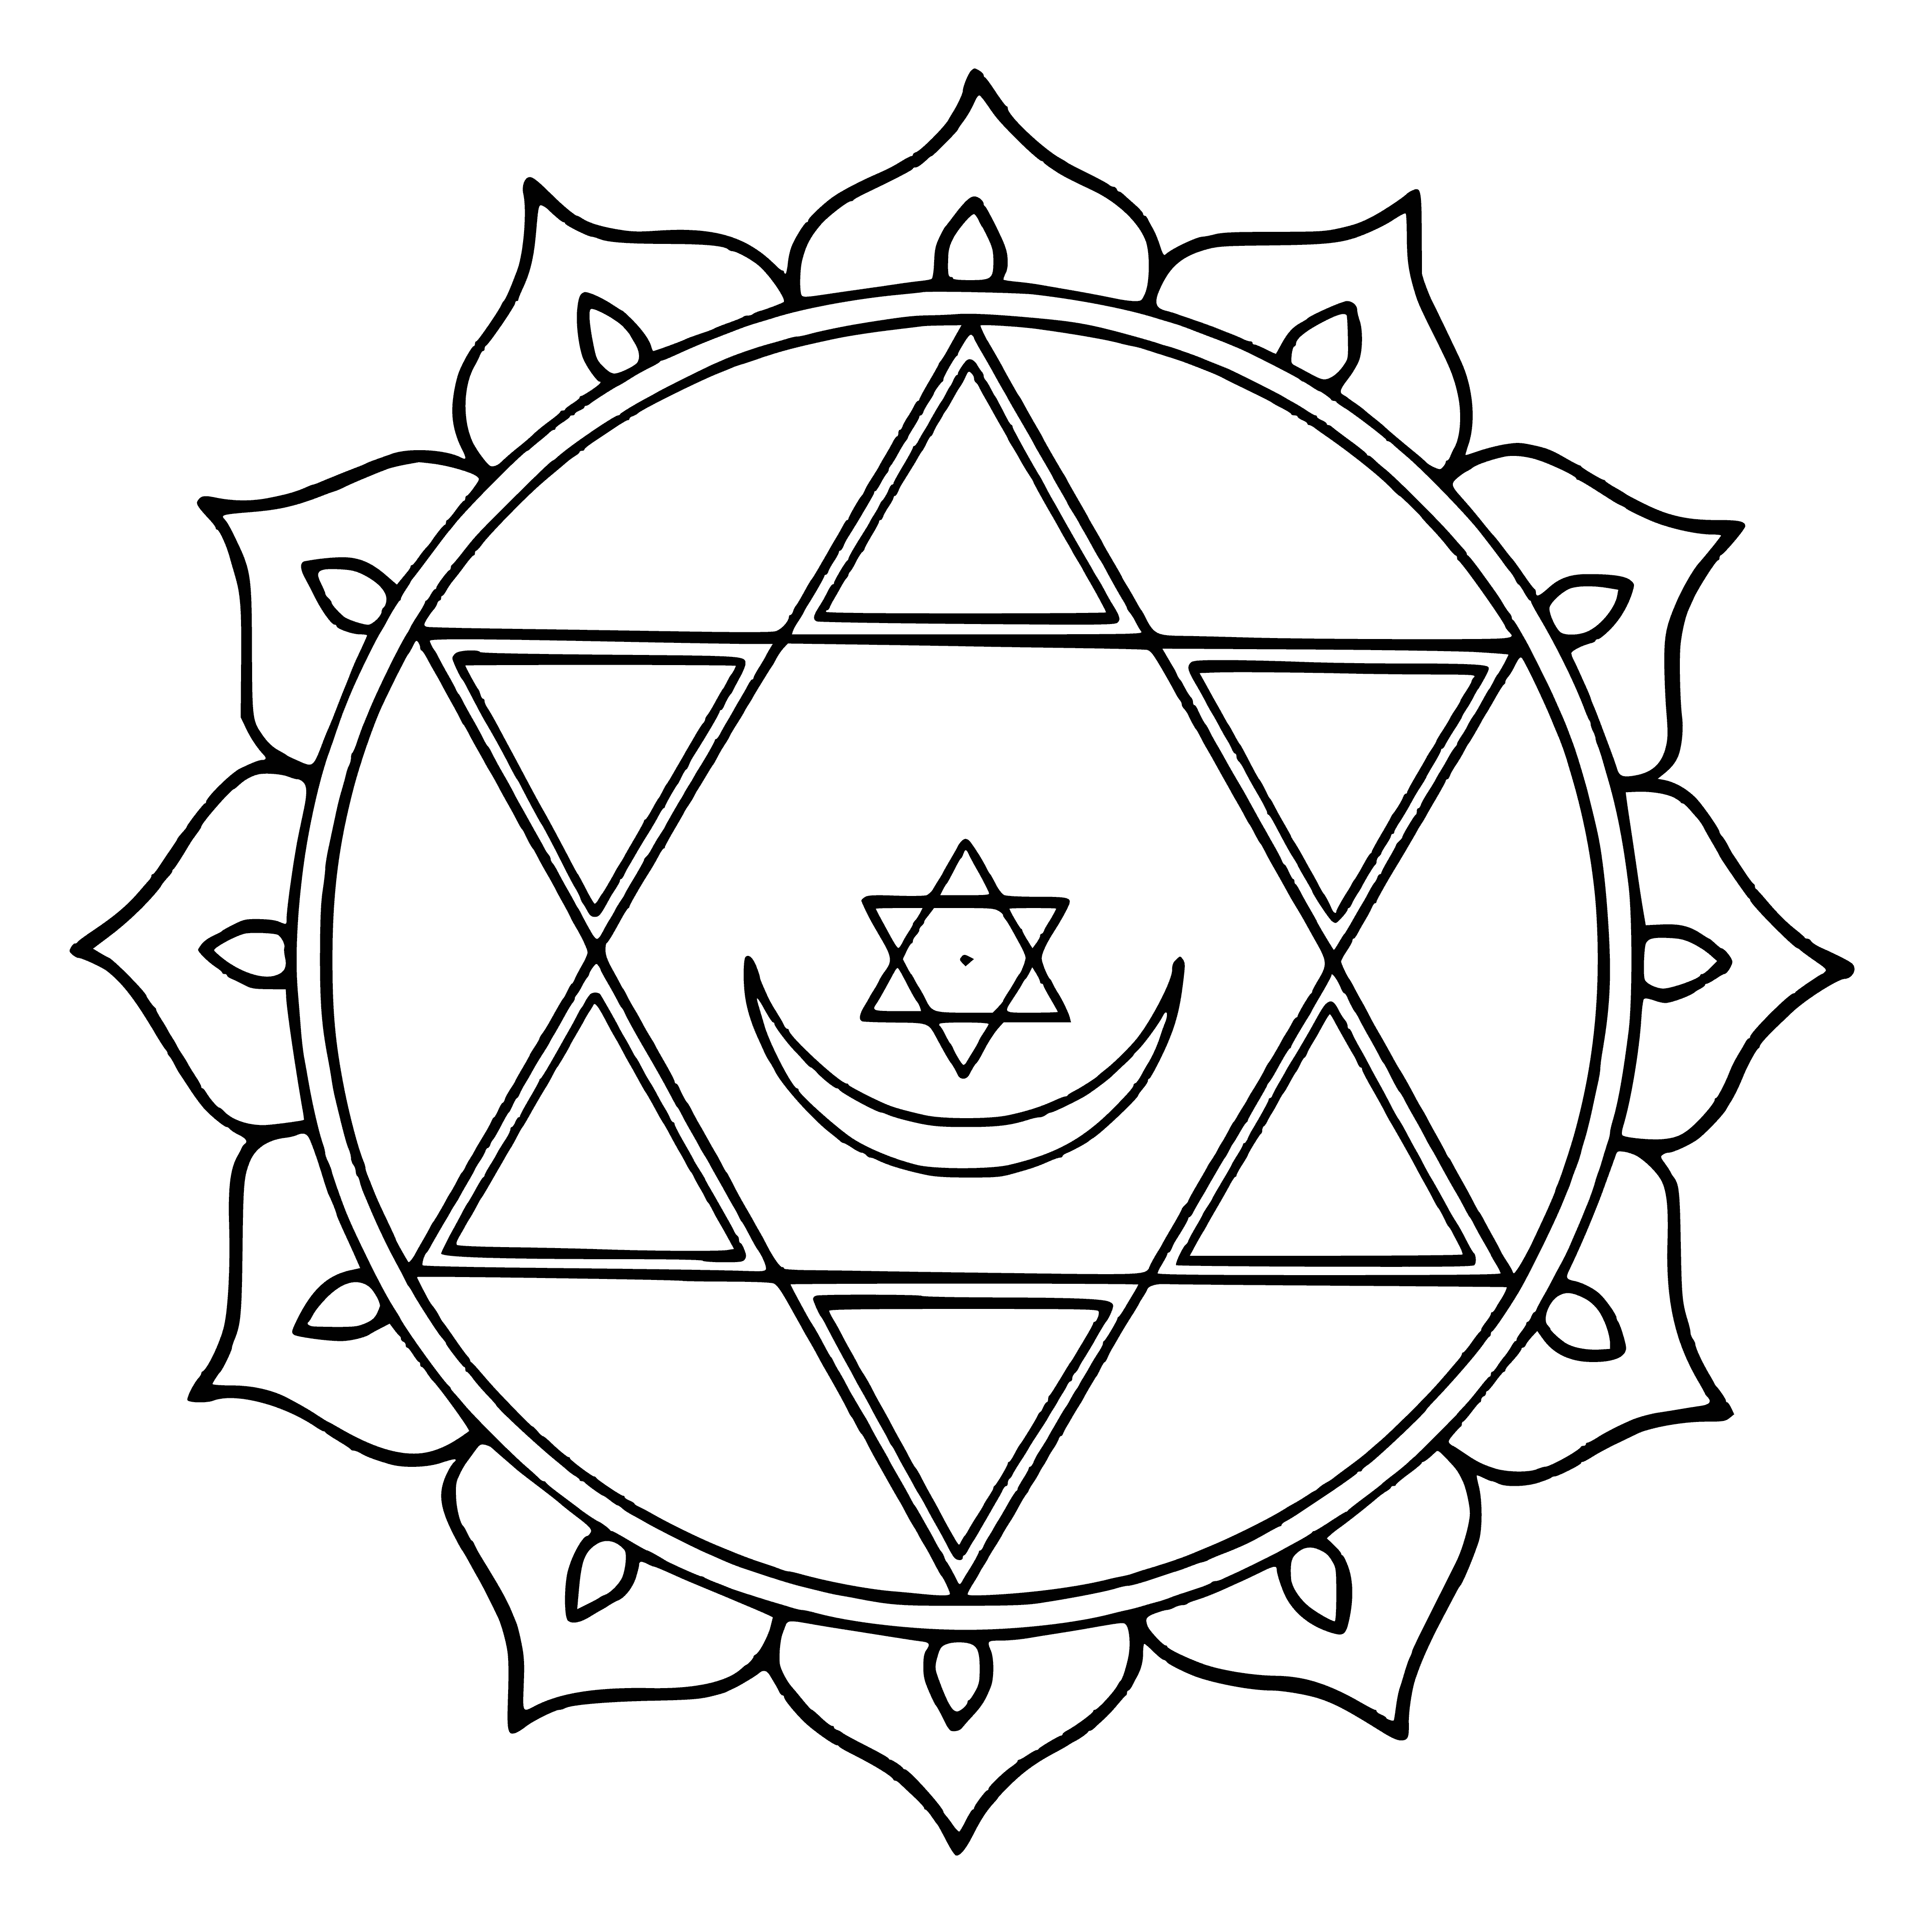 coloring page: A symmetrical mandala with a hexagram in the center, surrounded by a six-pointed circle in black, white, & gray.